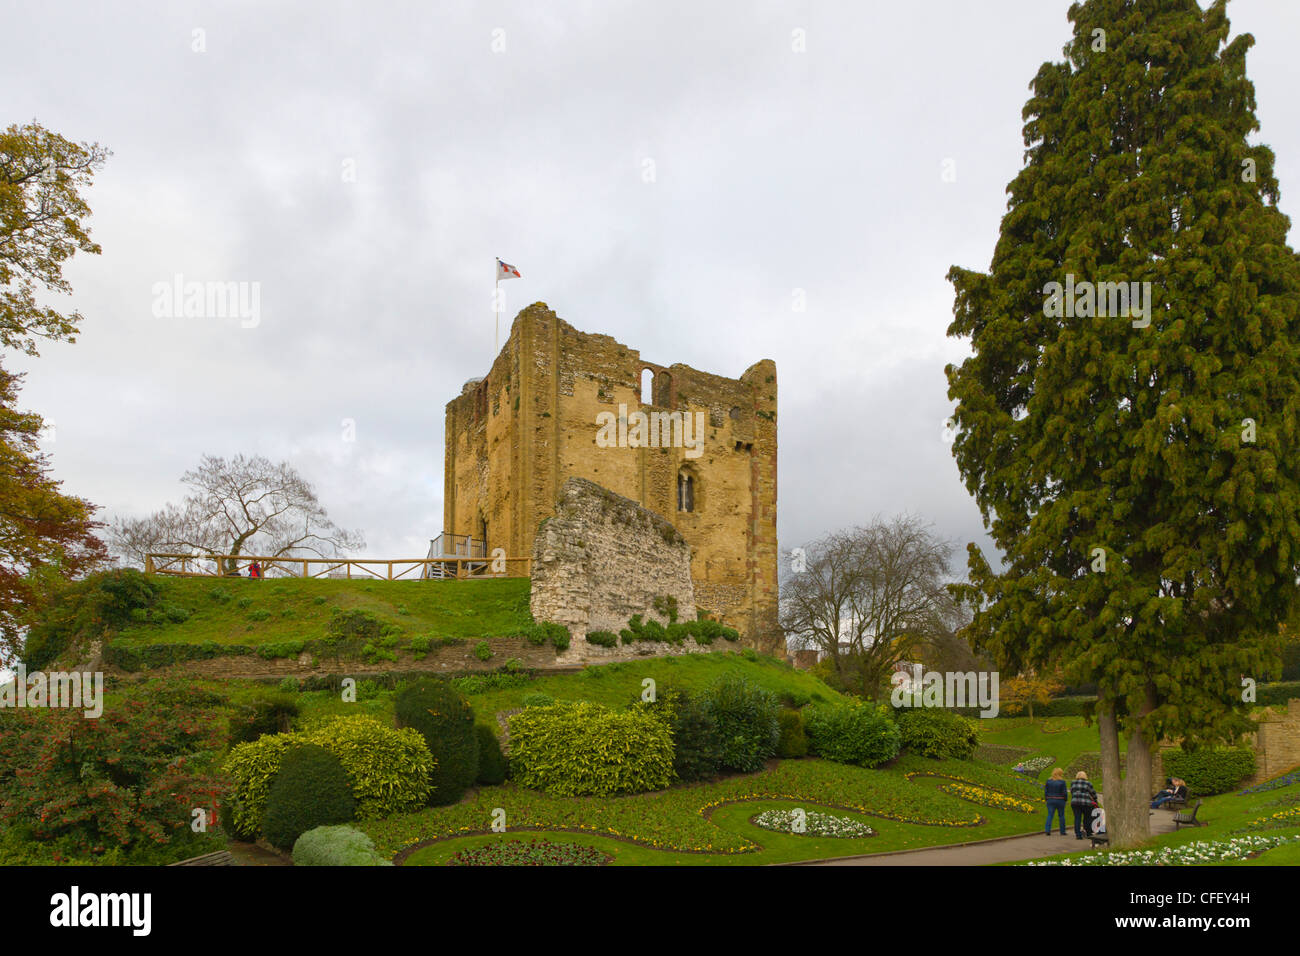 The Keep and Castle grounds, Guildford, Surrey, England, UK Stock Photo